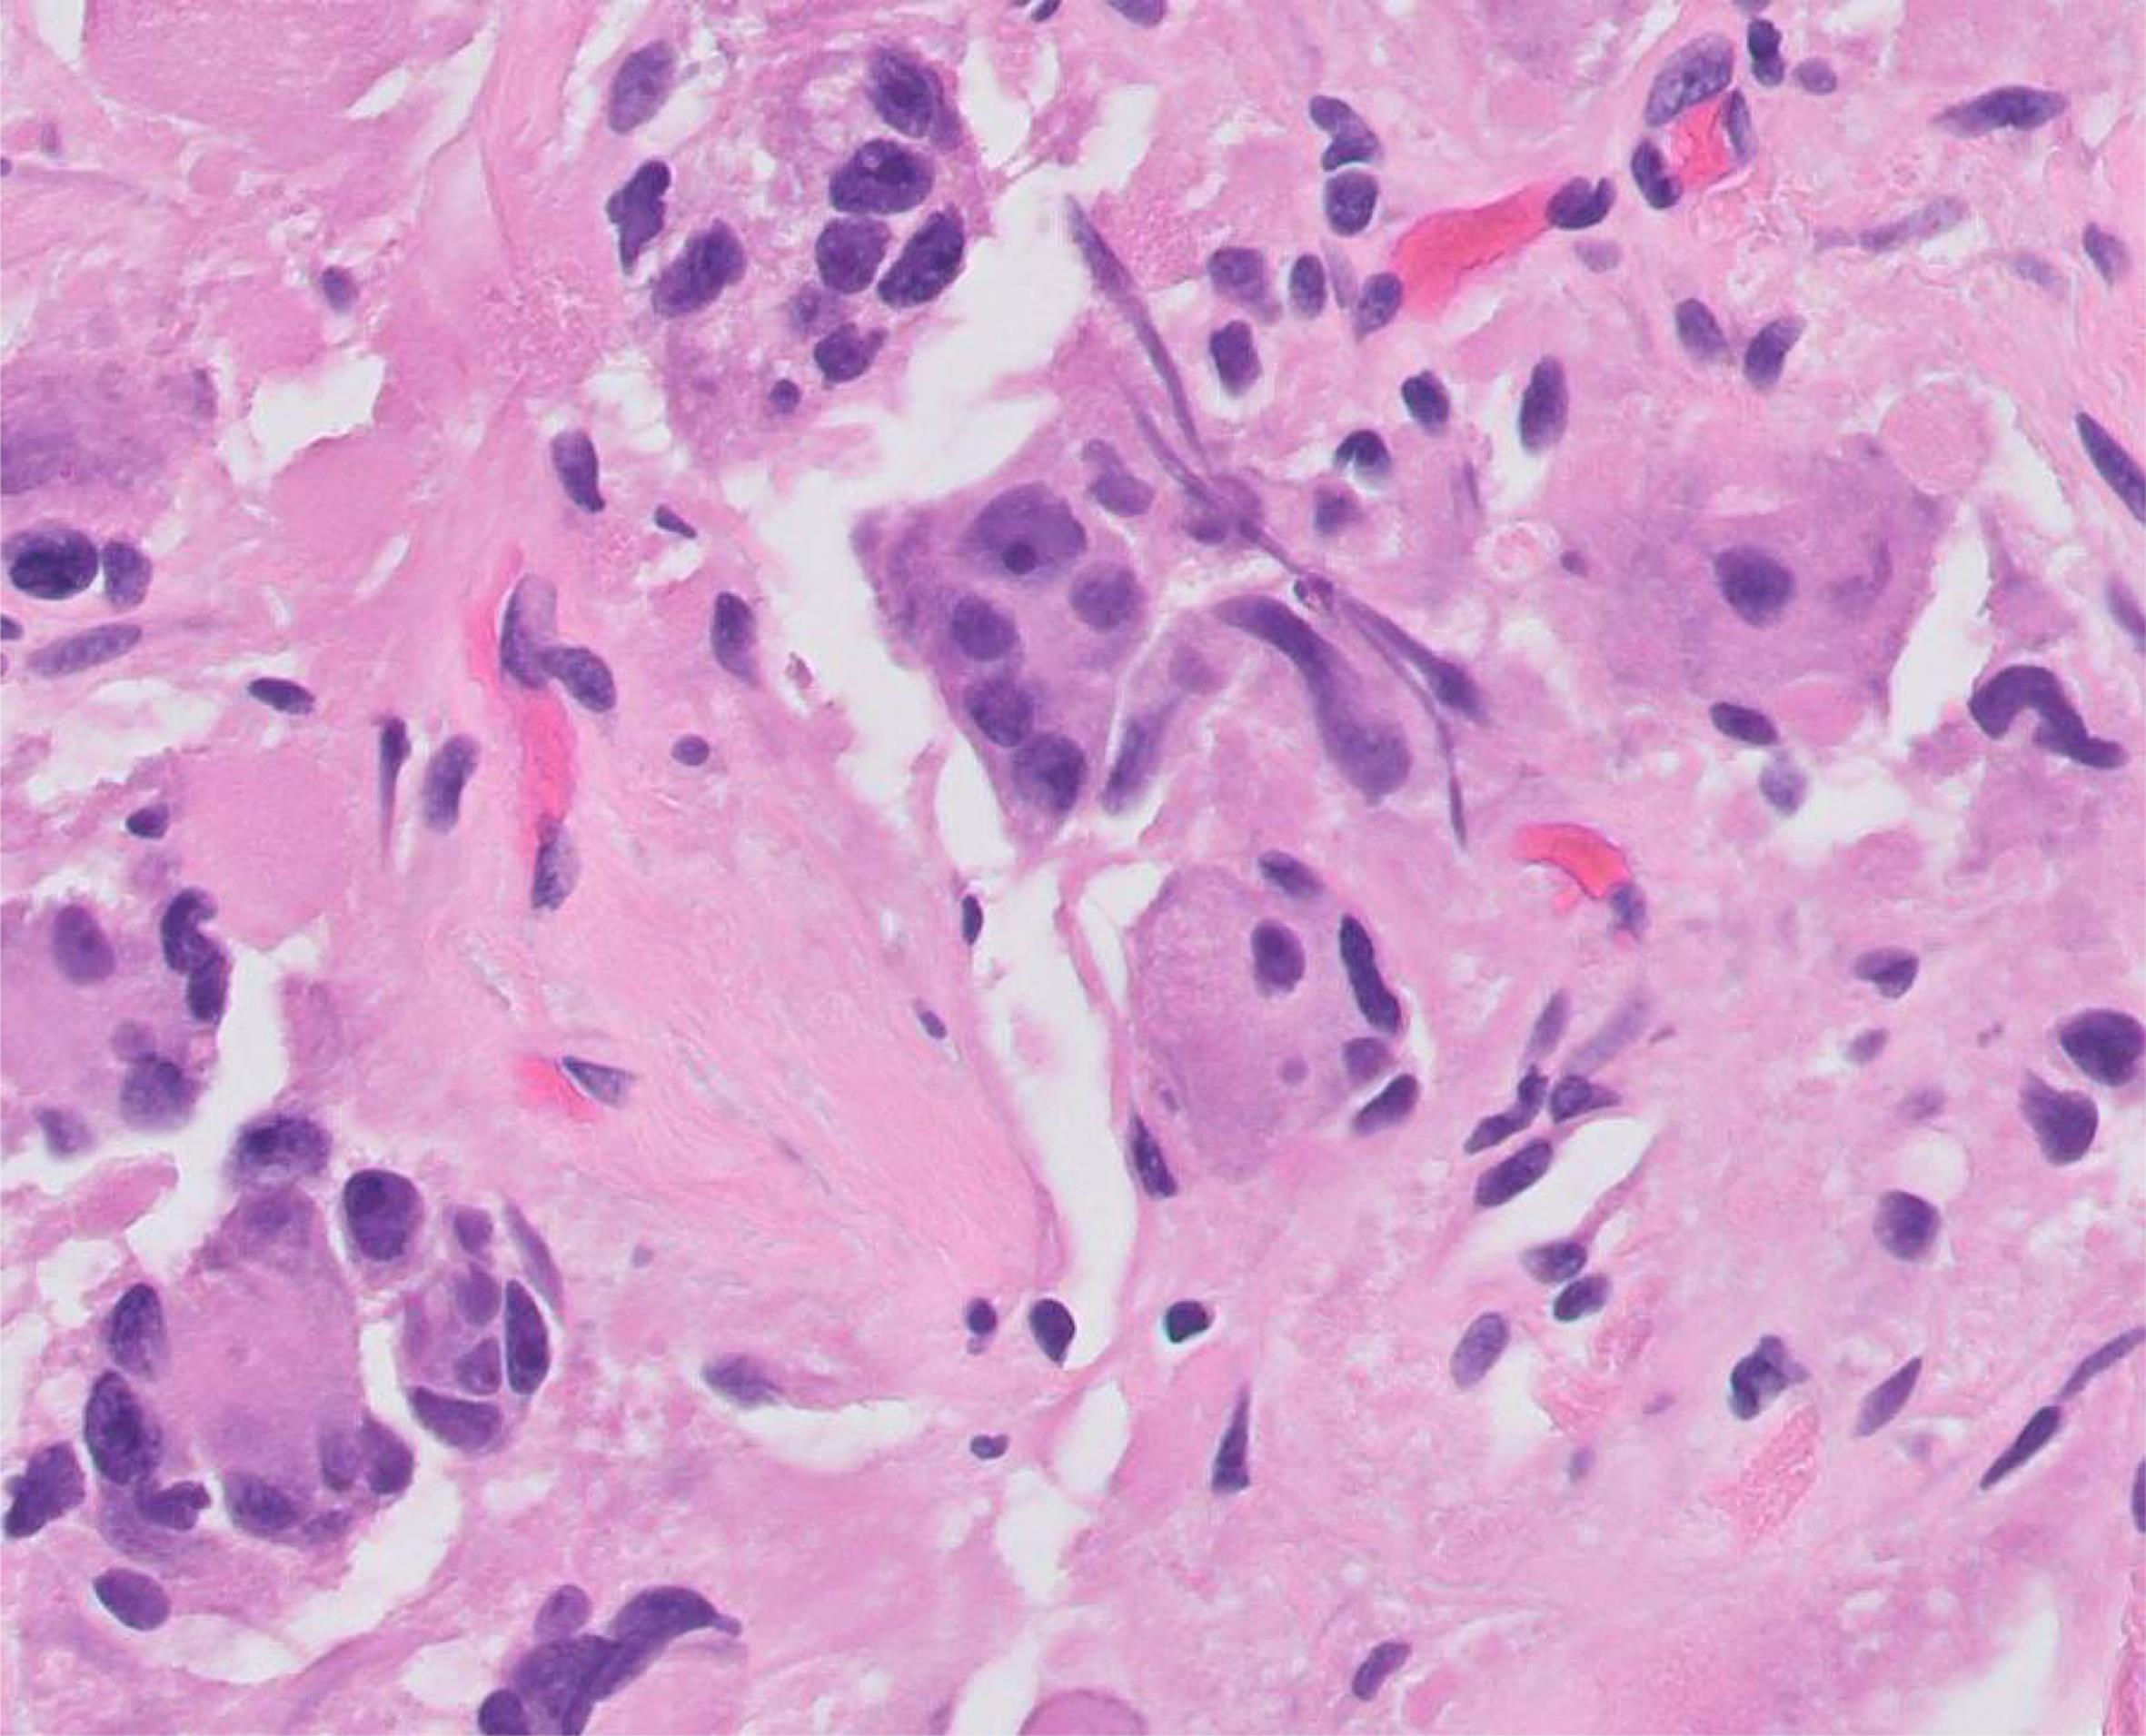 These multinucleated giant cells are maturing neuroblasts or immature ganglion cells.